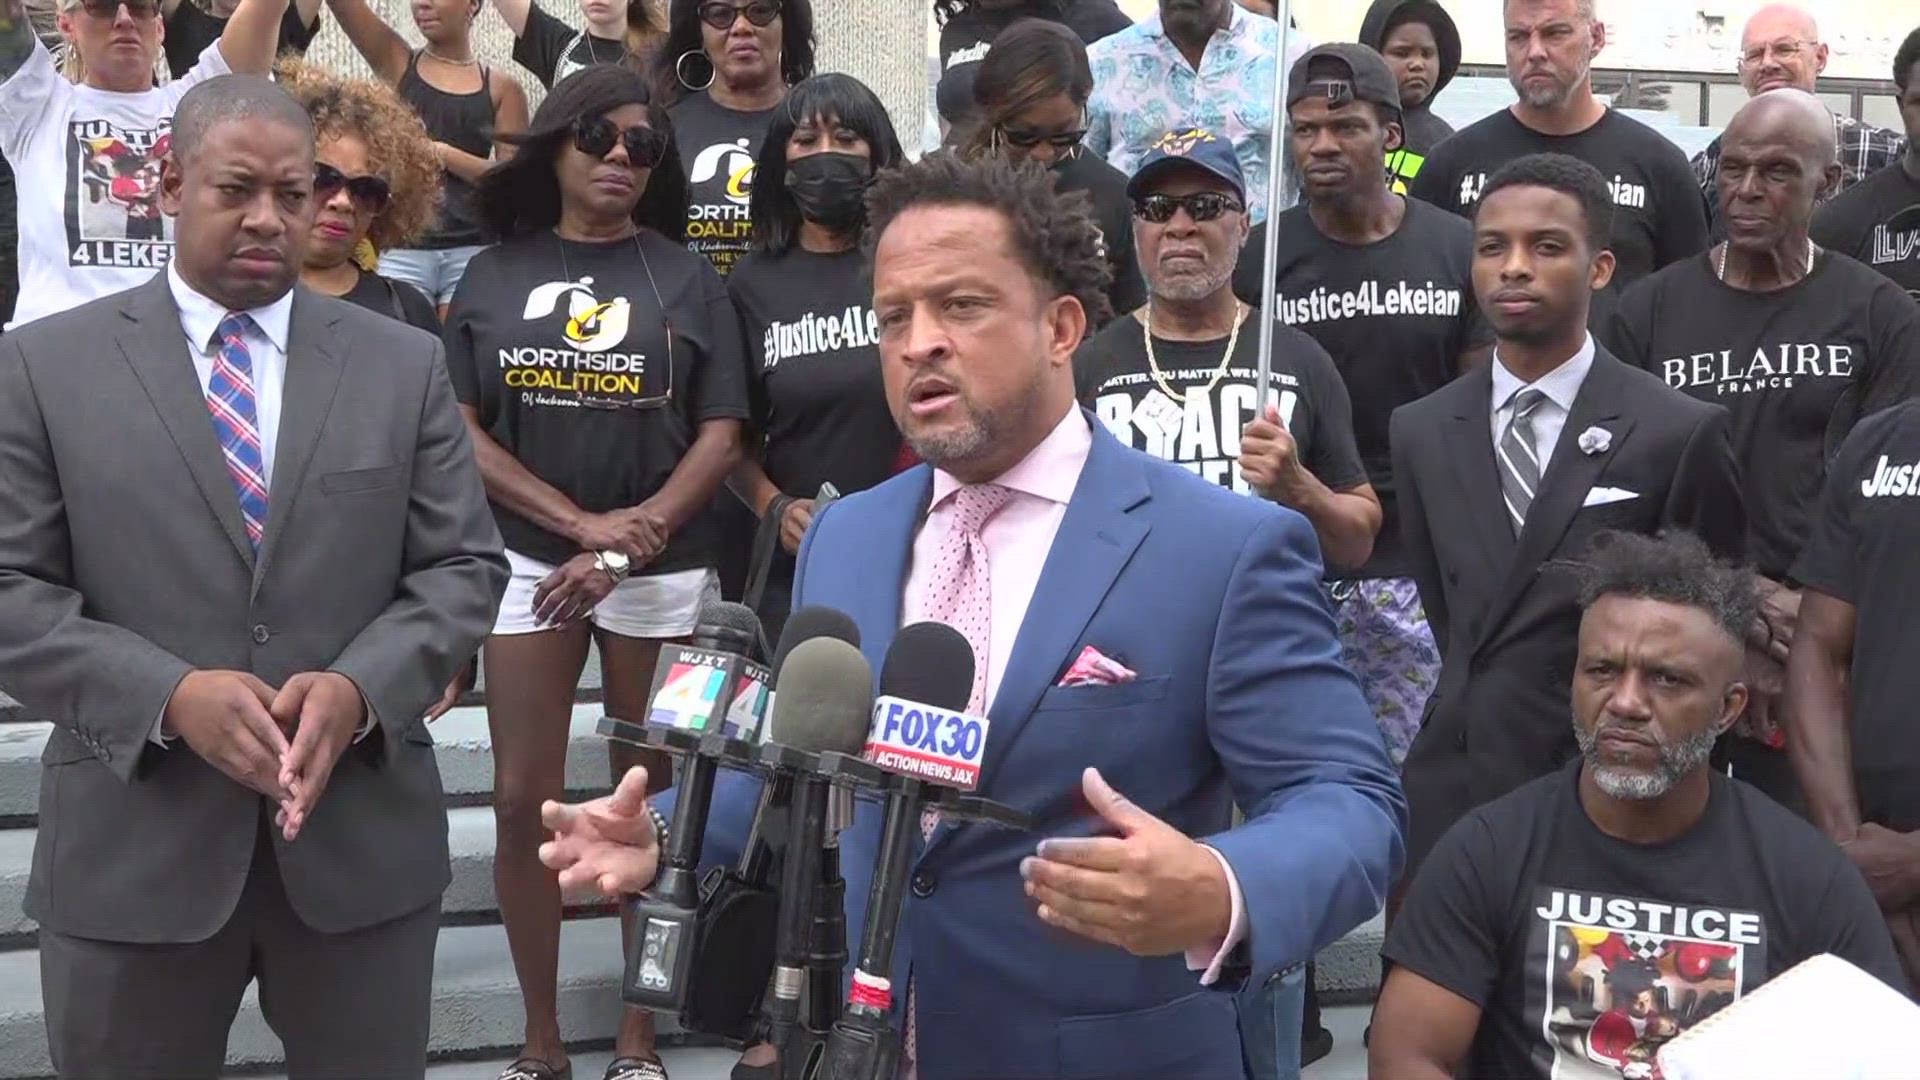 Attorneys of 24-year-old Le'Keian Woods spoke on the steps of JSO Tuesday calling for 'full transparency' as viral video shows officers strike Woods during arrest.